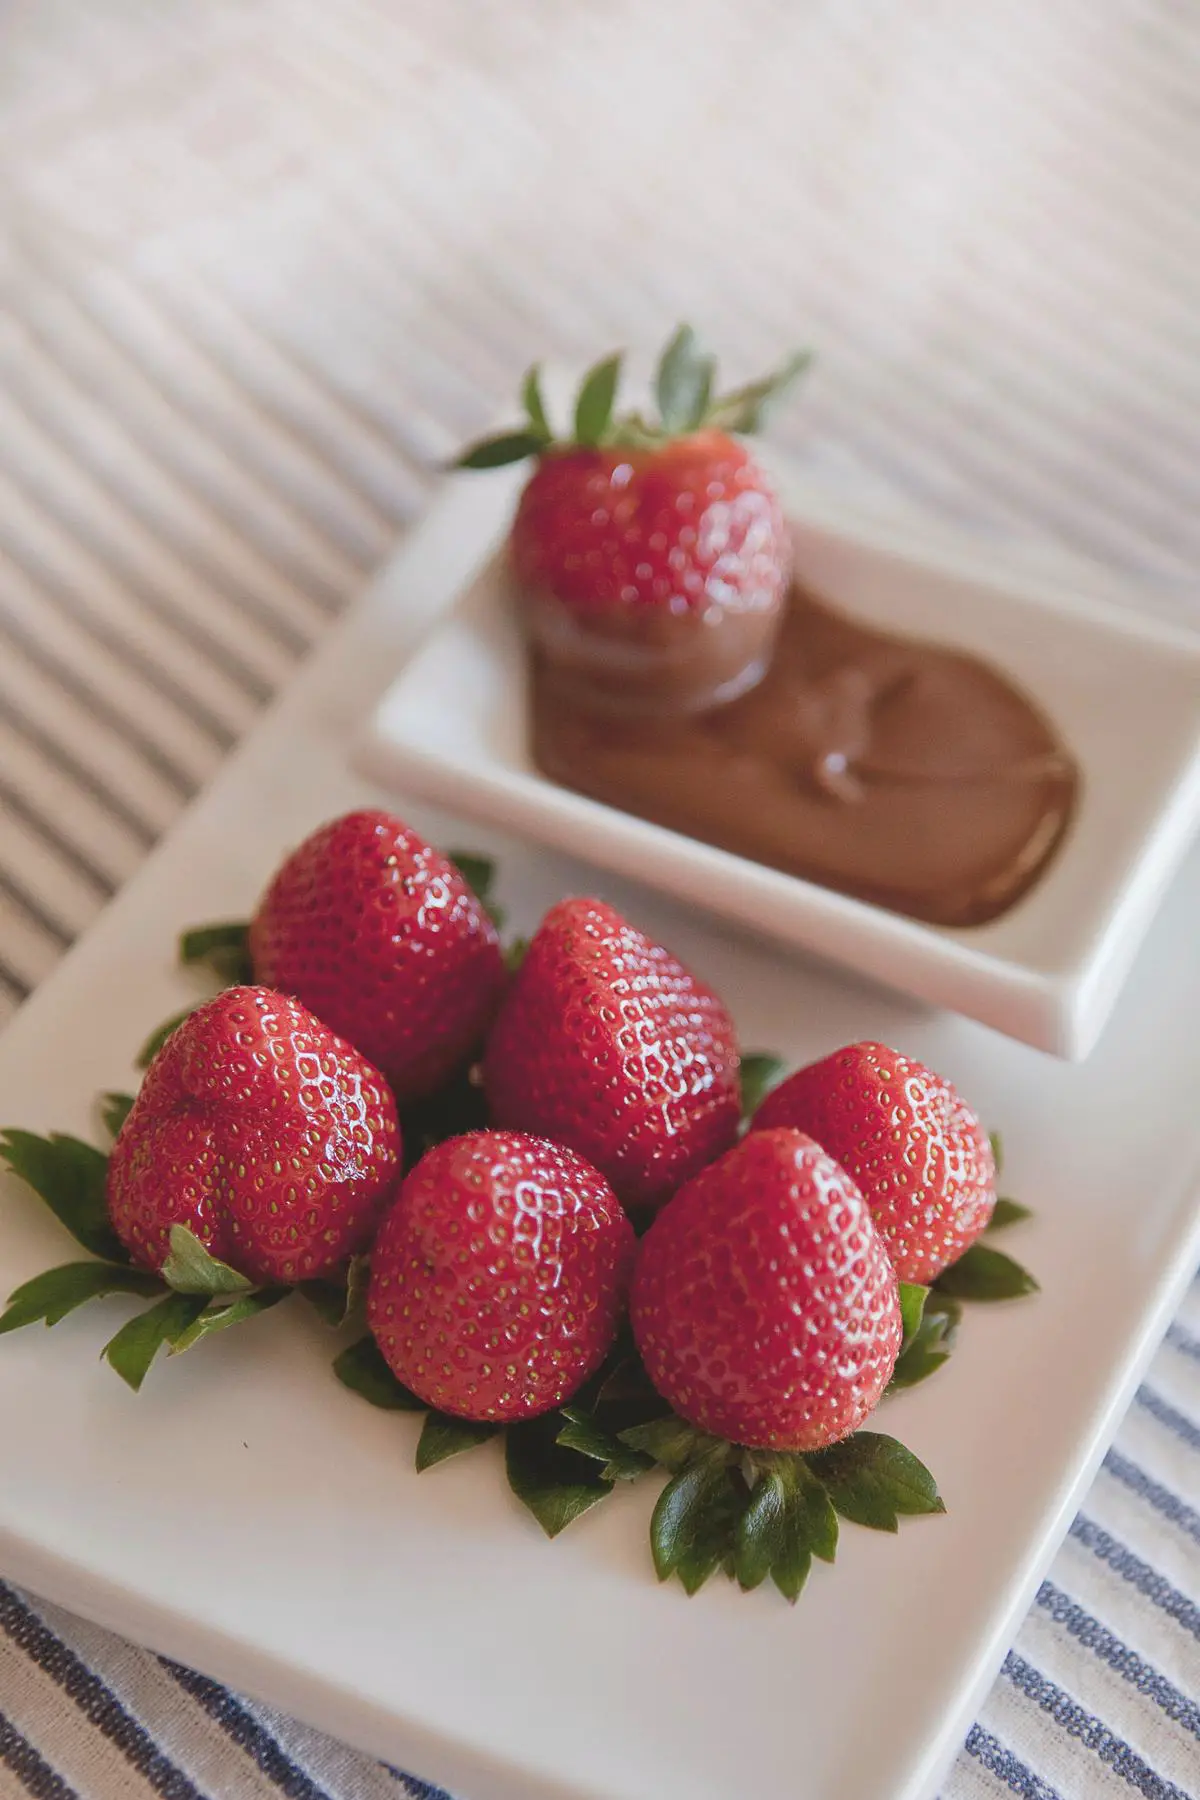 A plate of chocolate-covered strawberries with a drizzle of dark chocolate on top, perfect for a family dessert.